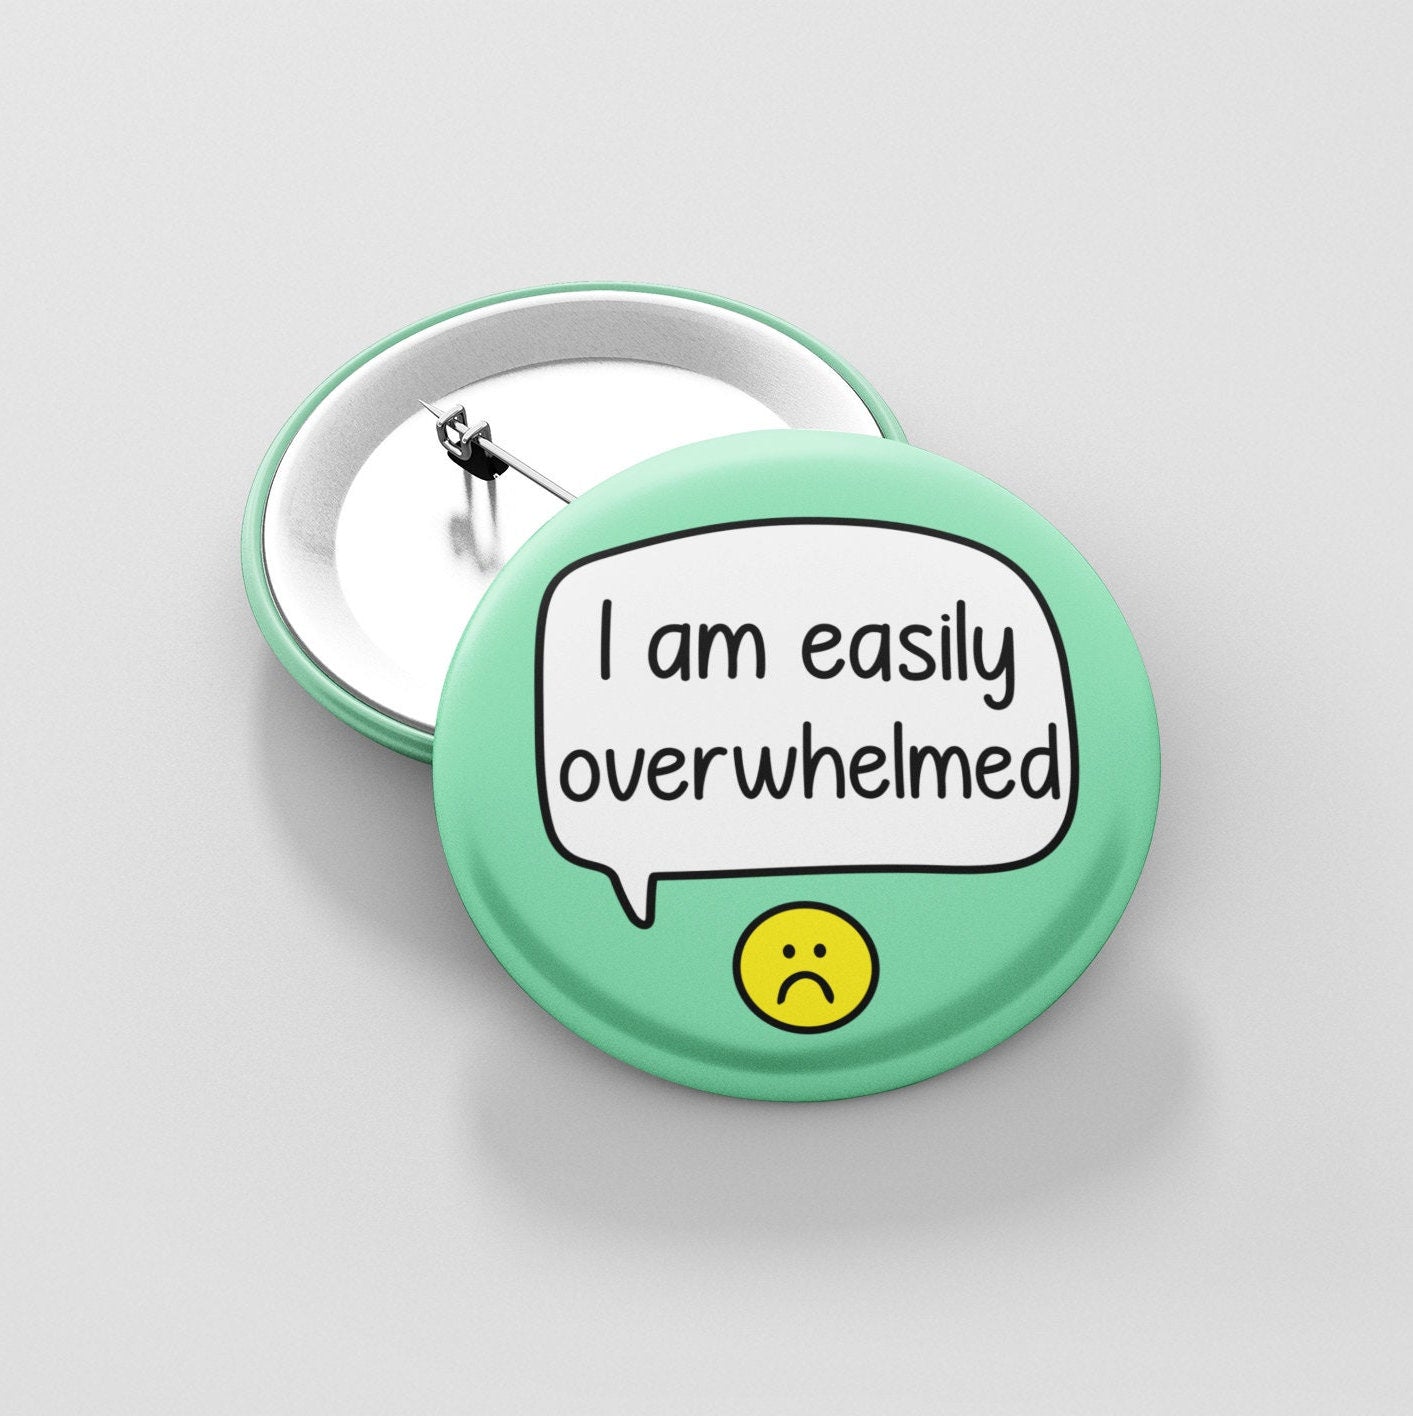 I Am Easily Overwhelmed Badge Pin | Mental Health Badges - Anxiety Gift